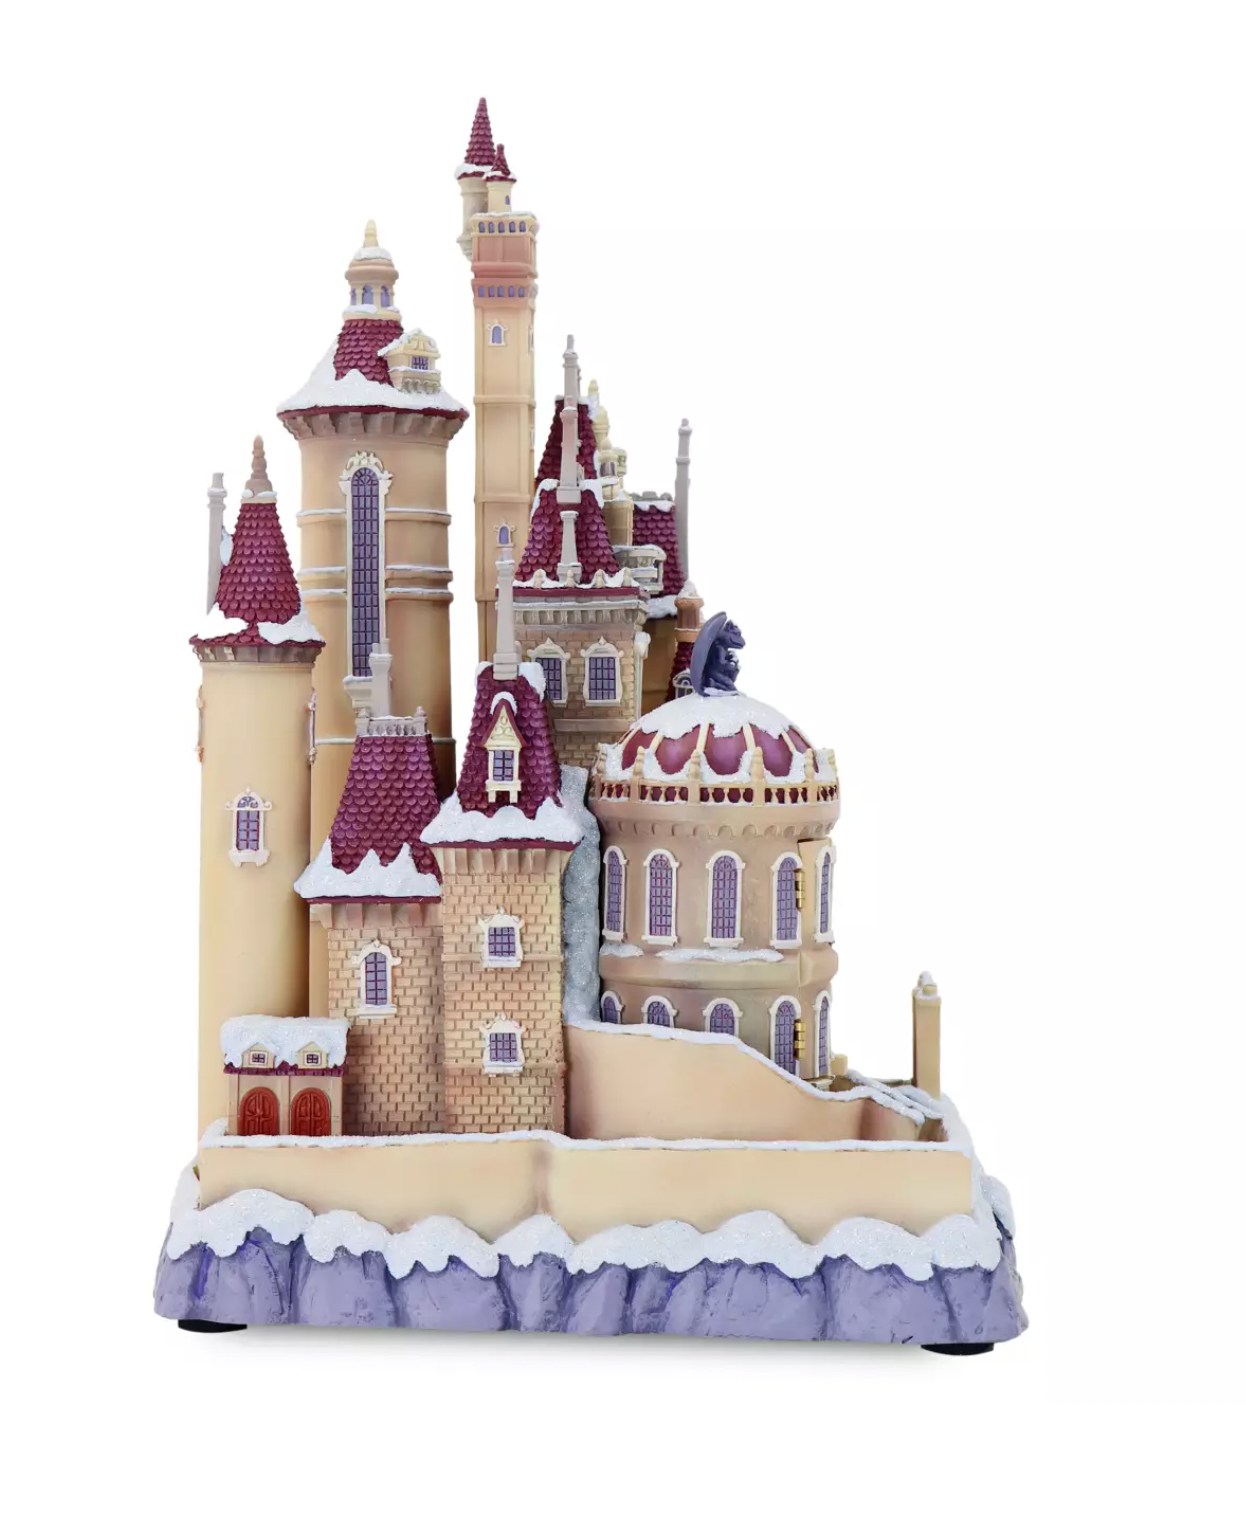 Disney Castle Collection Beauty and the Beast Light-Up Figurine Limited New Box